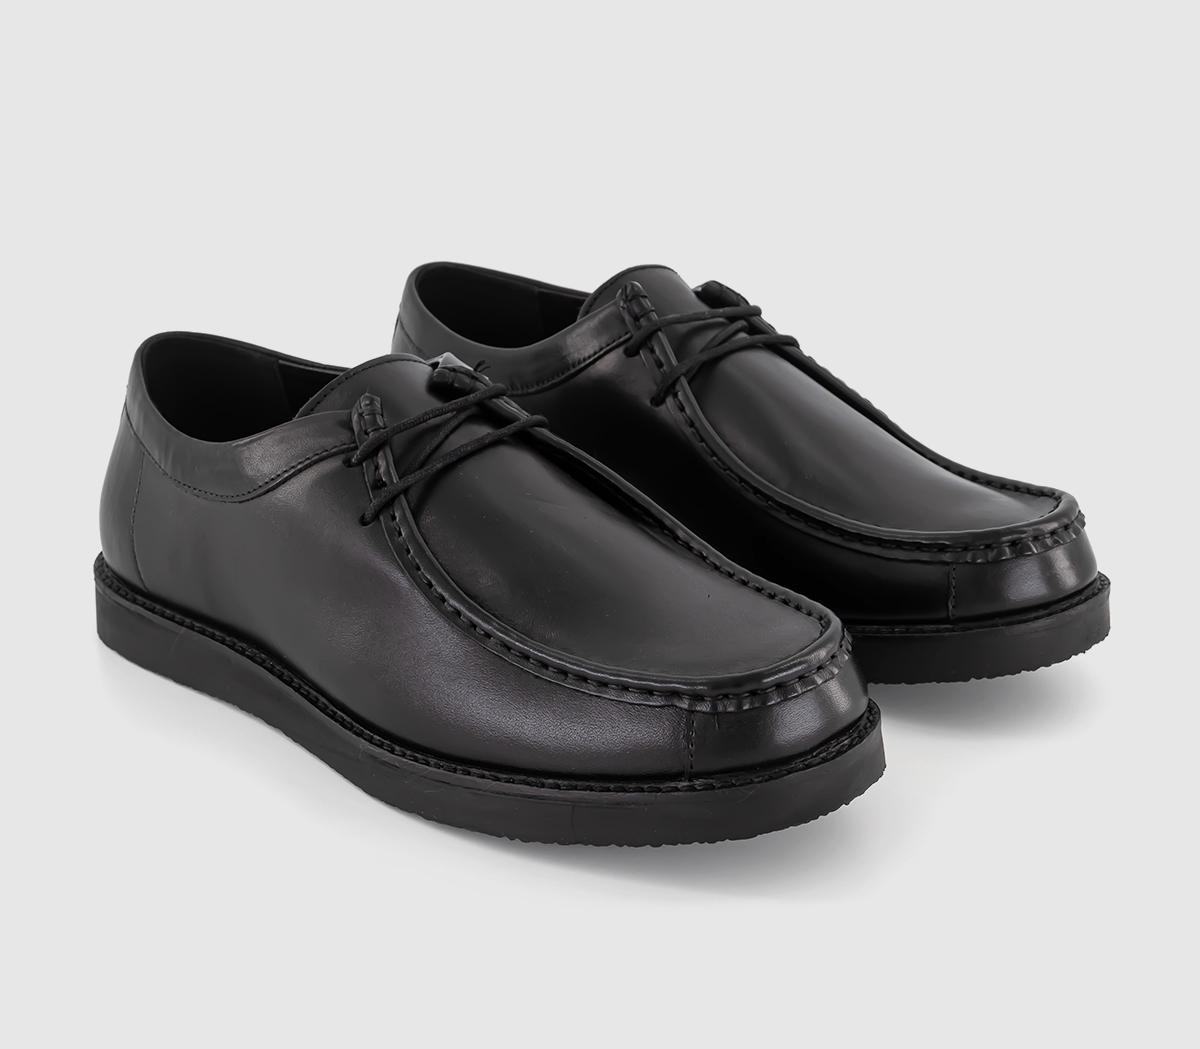 OFFICE Chelmsford Stitch Apron Shoes Black Leather, 12